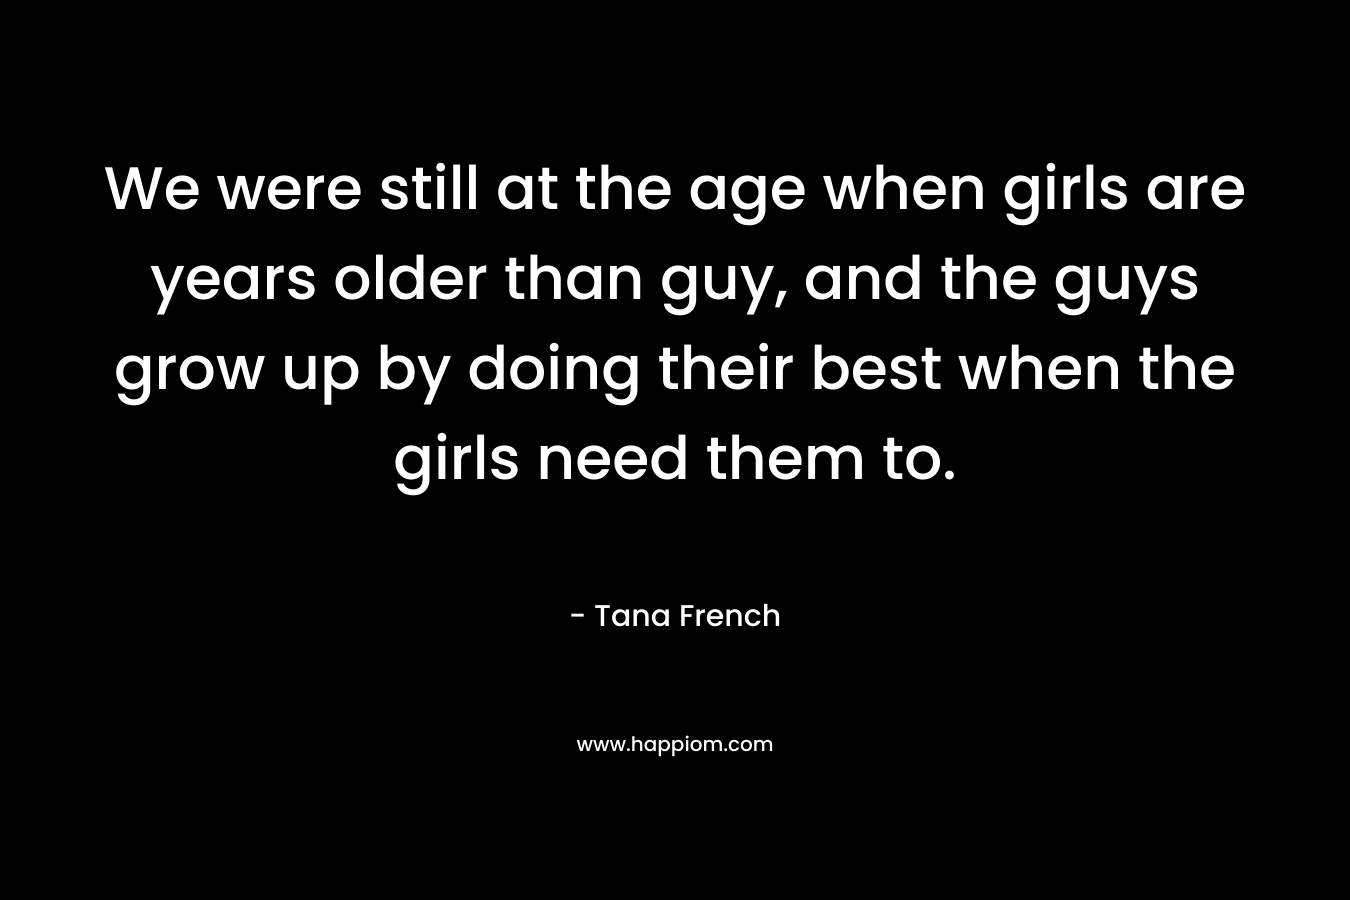 We were still at the age when girls are years older than guy, and the guys grow up by doing their best when the girls need them to.